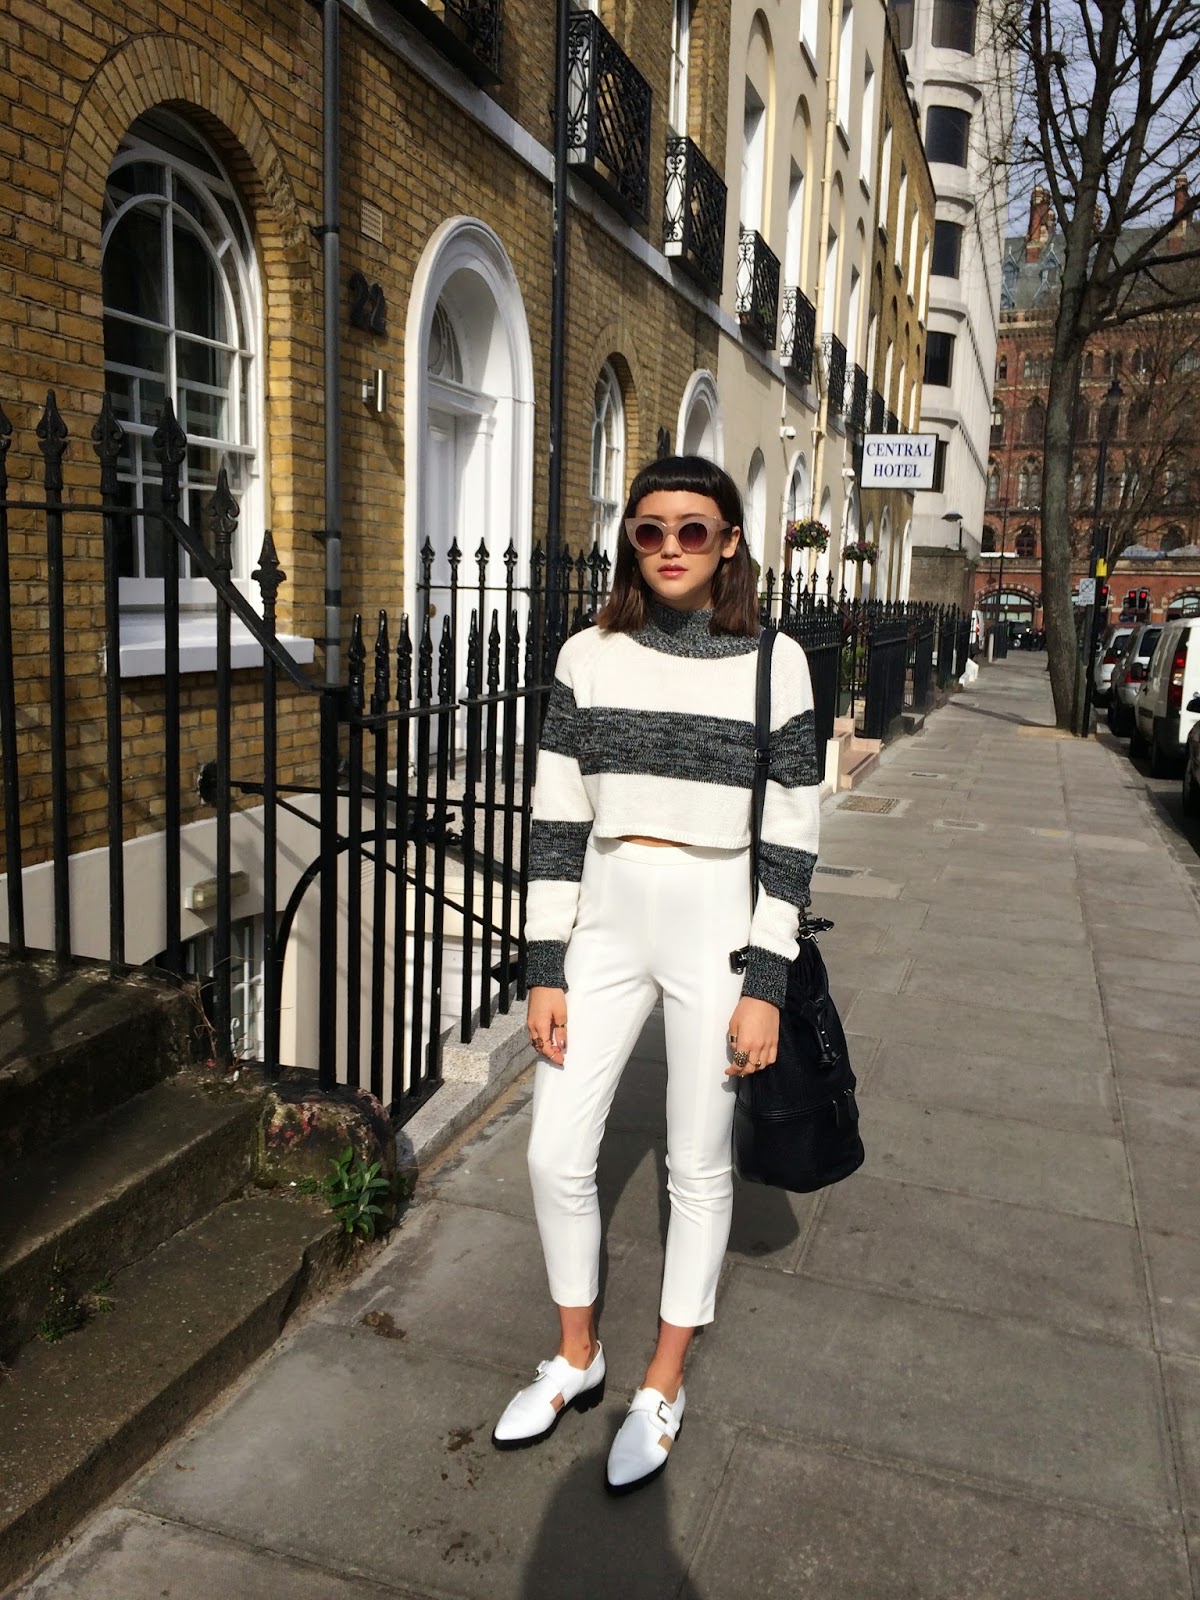 handful of fashion, top fashion blogger, top fashion blogs, top fashion blog, fashion blogs, fashion blog, outfit, outfits, top uk blog, personal style blog, WIWT, OOTD